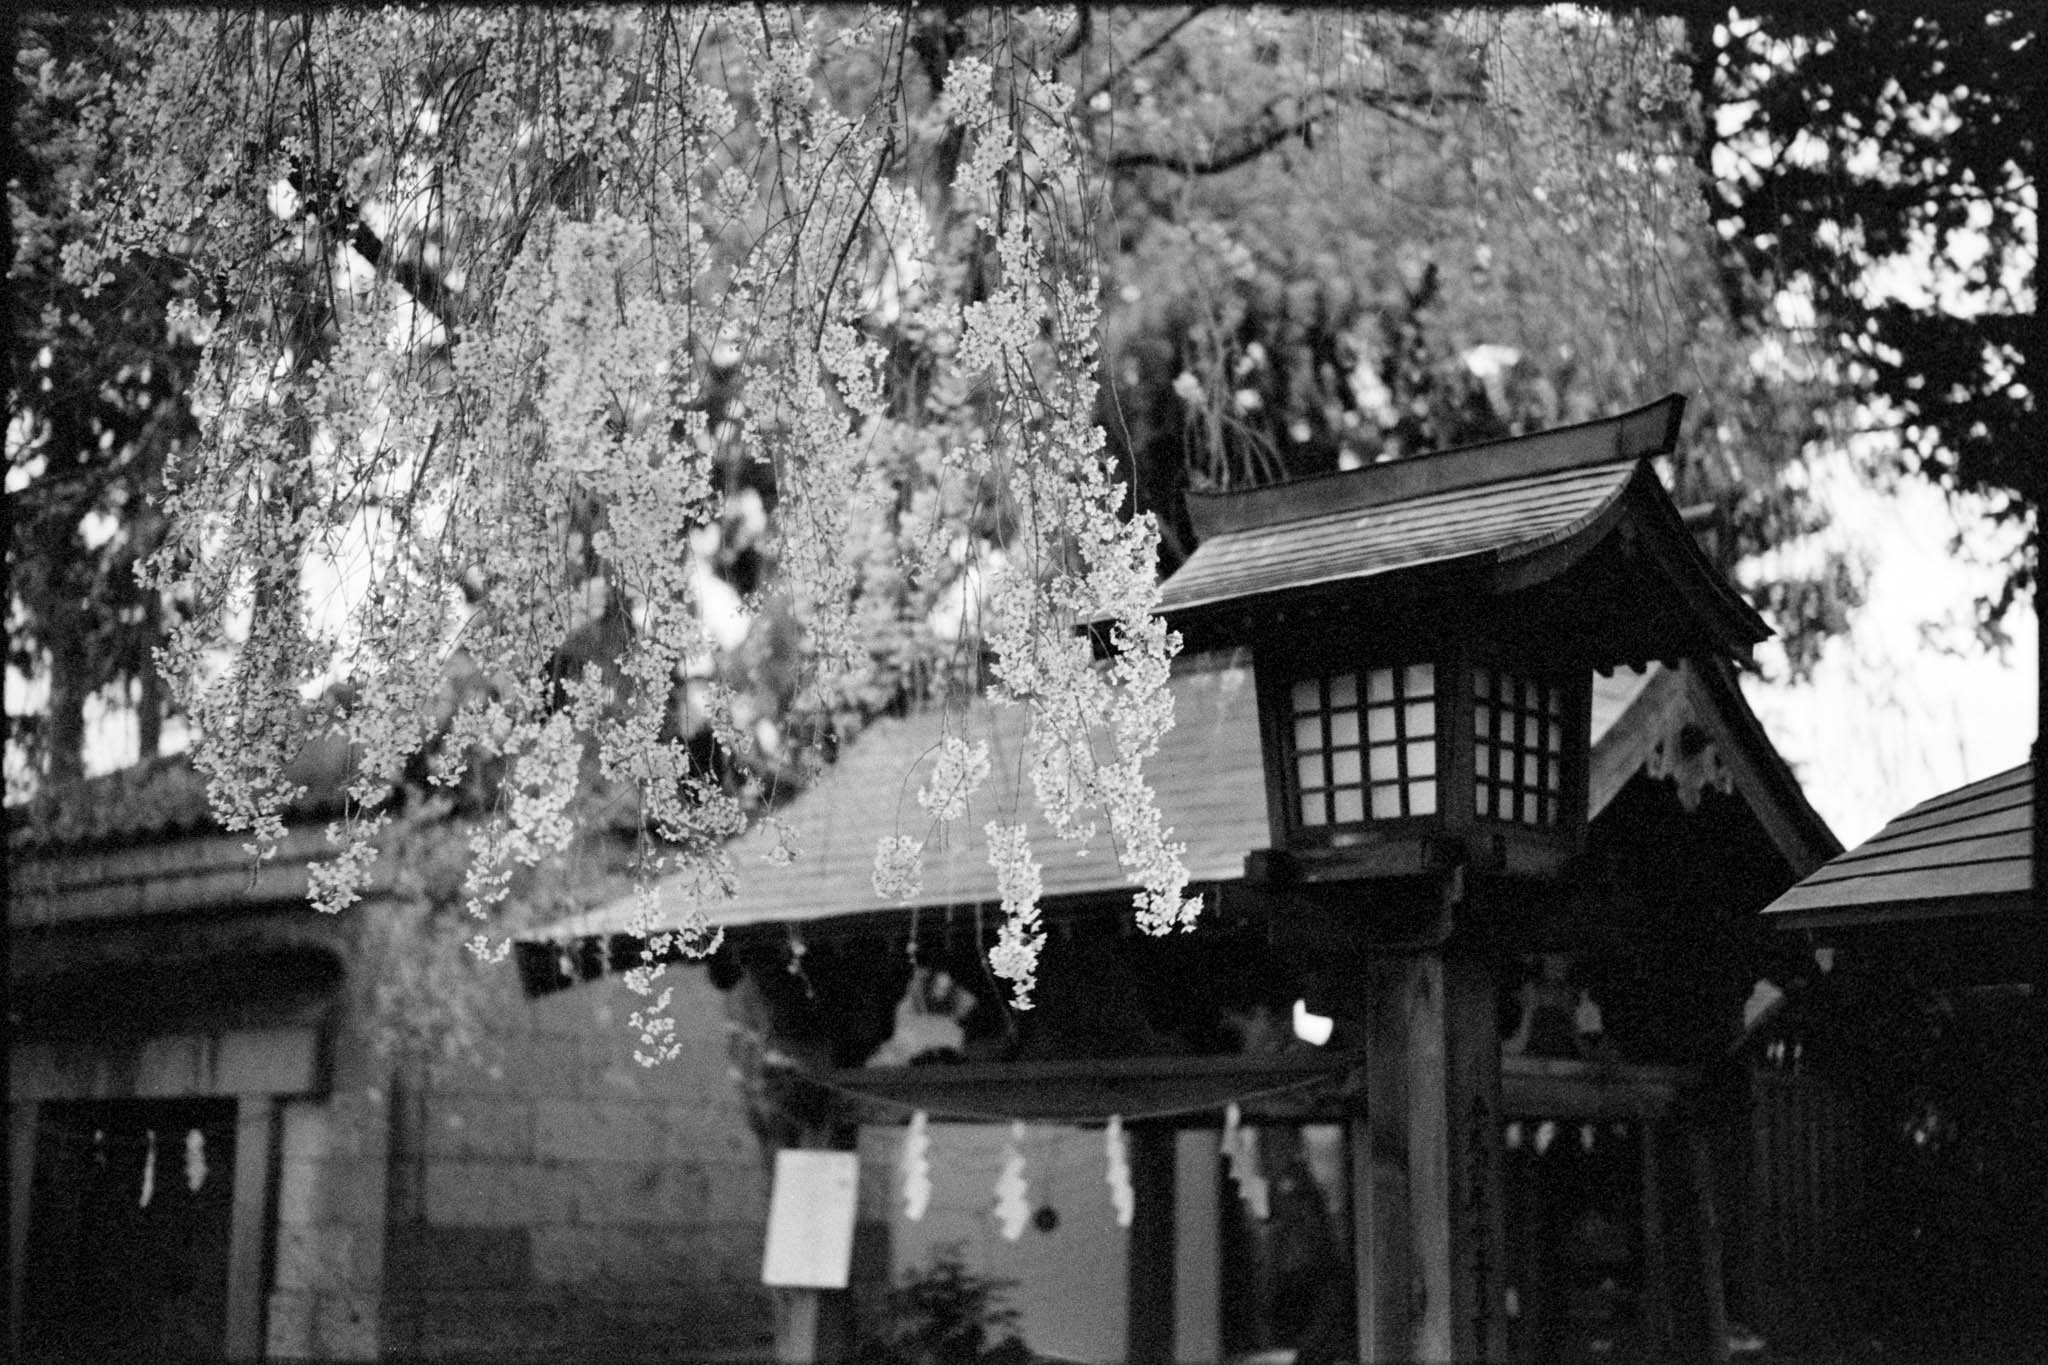 Monochrome image of a tranquil Shinto shrine gate nestled within dense foliage in Japan